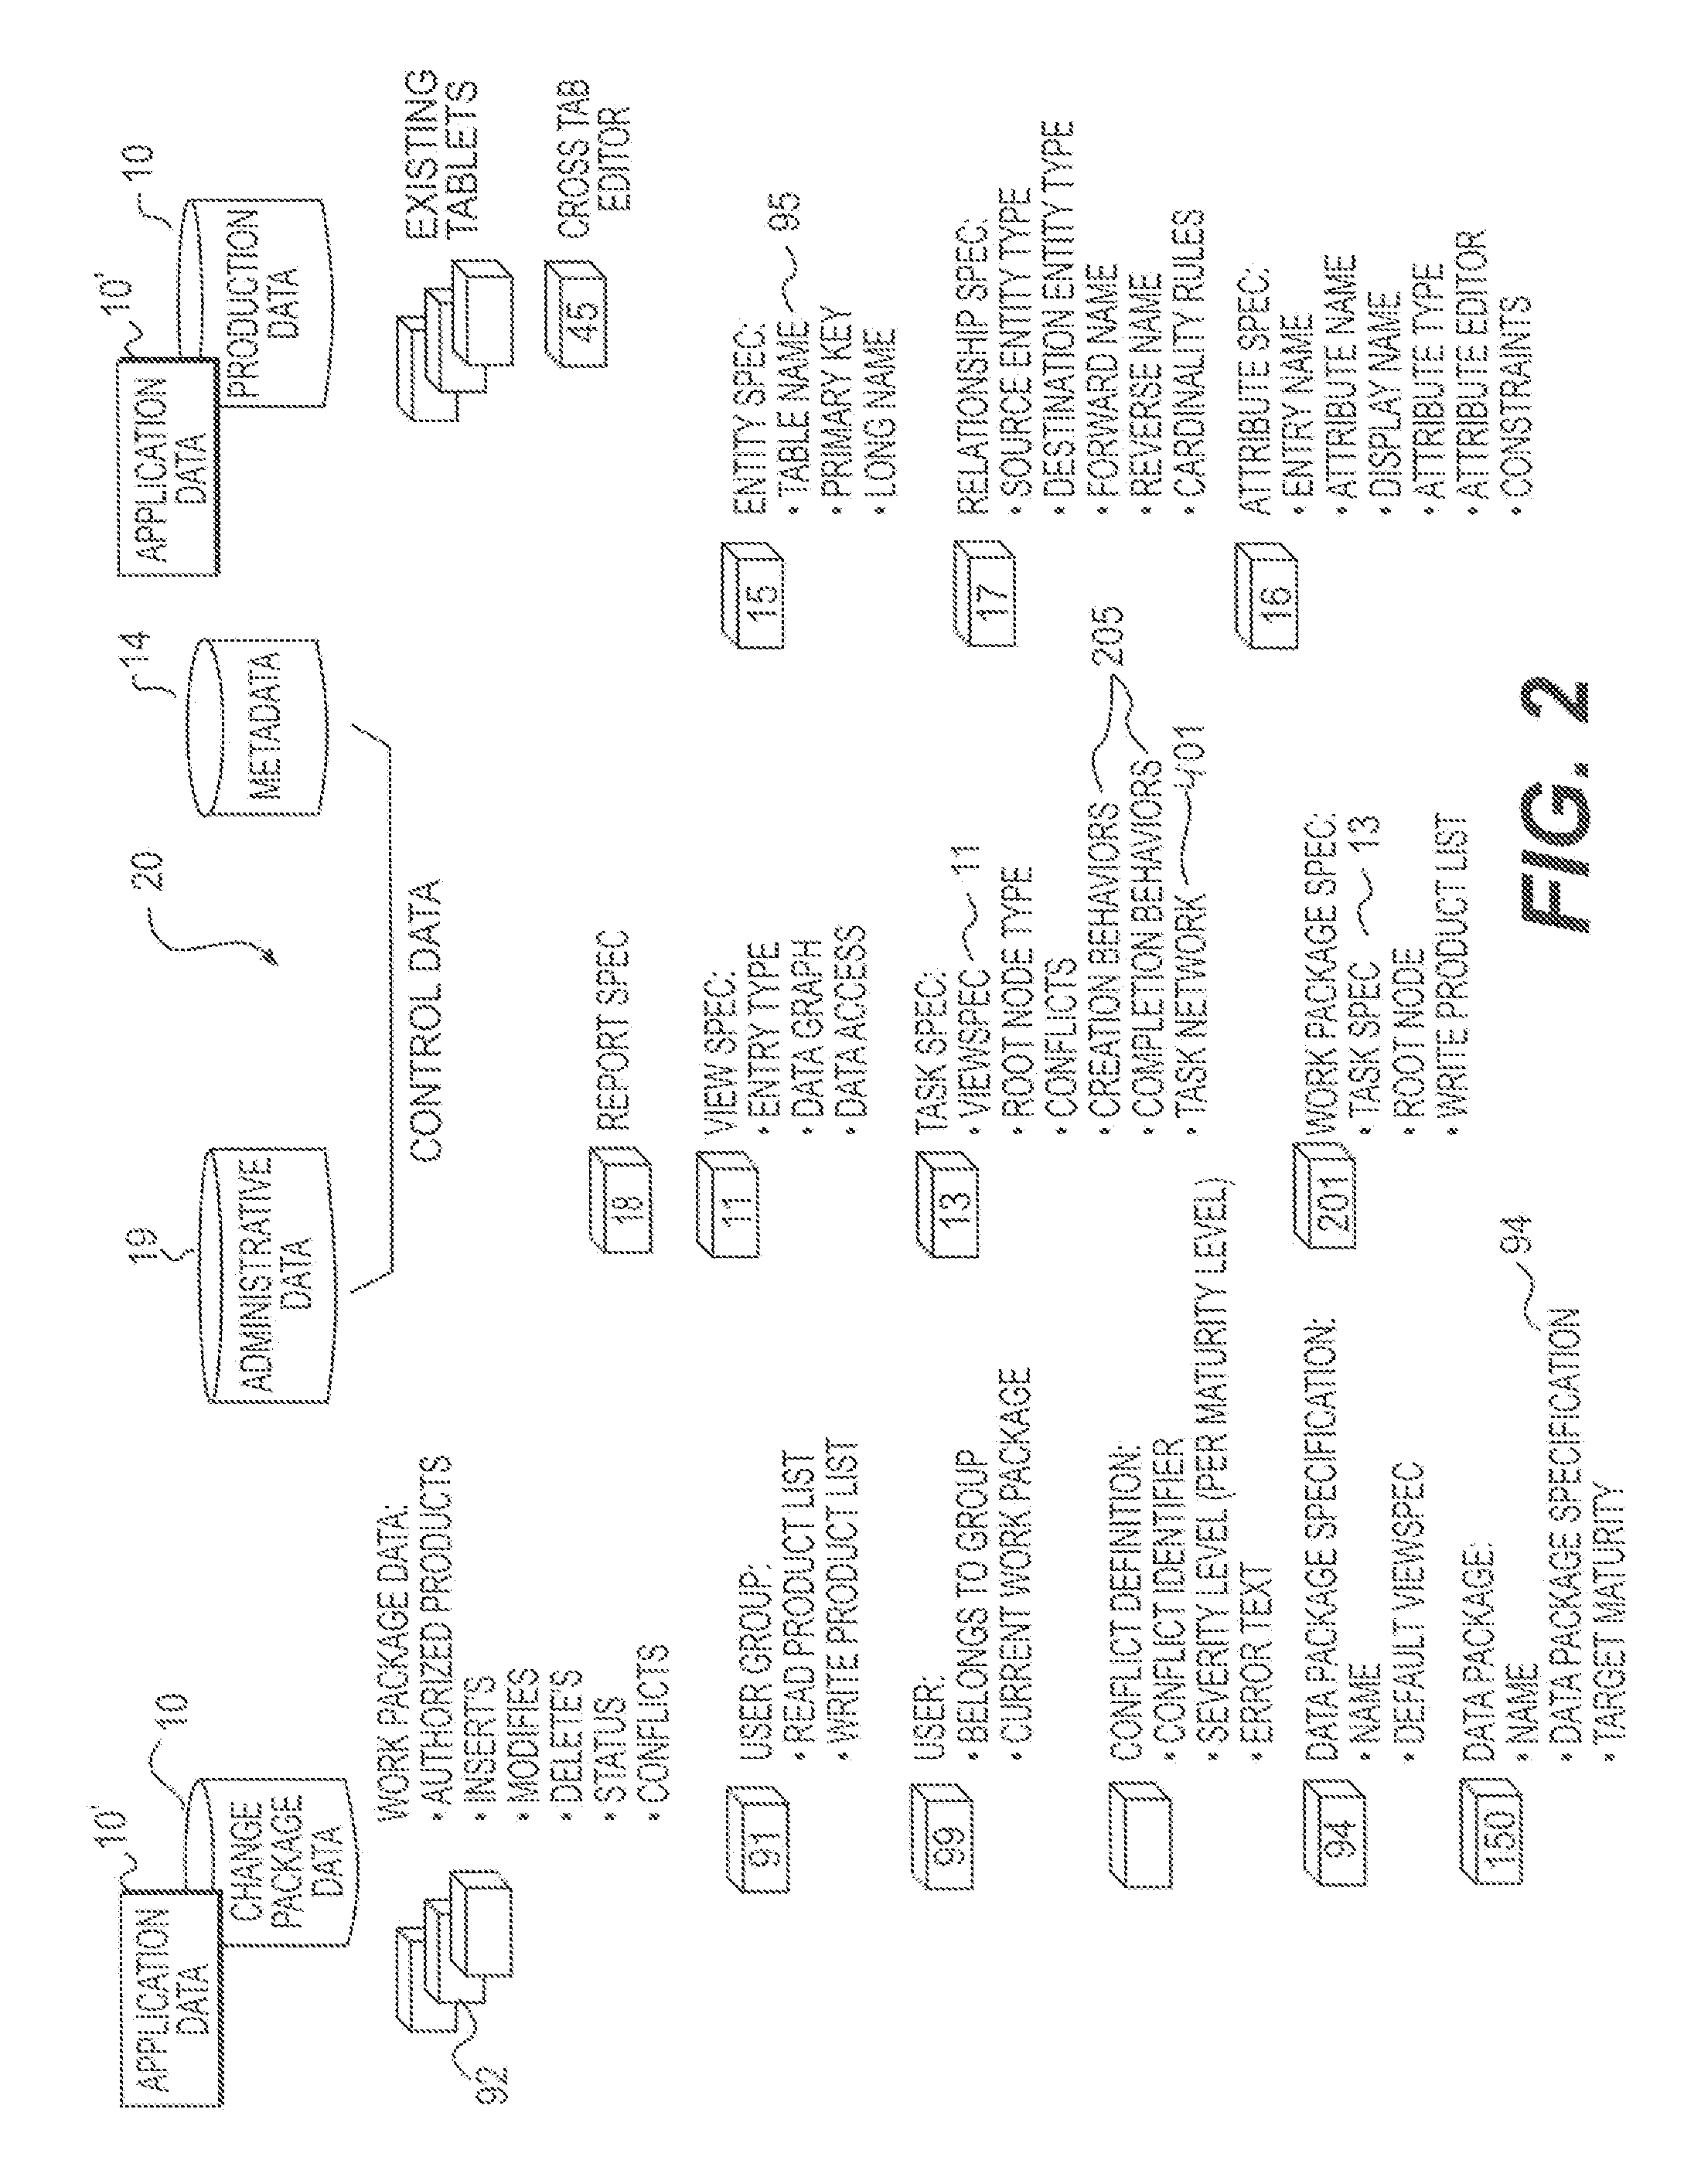 Methods and systems for providing intuitive direction for populating complex model content into a database